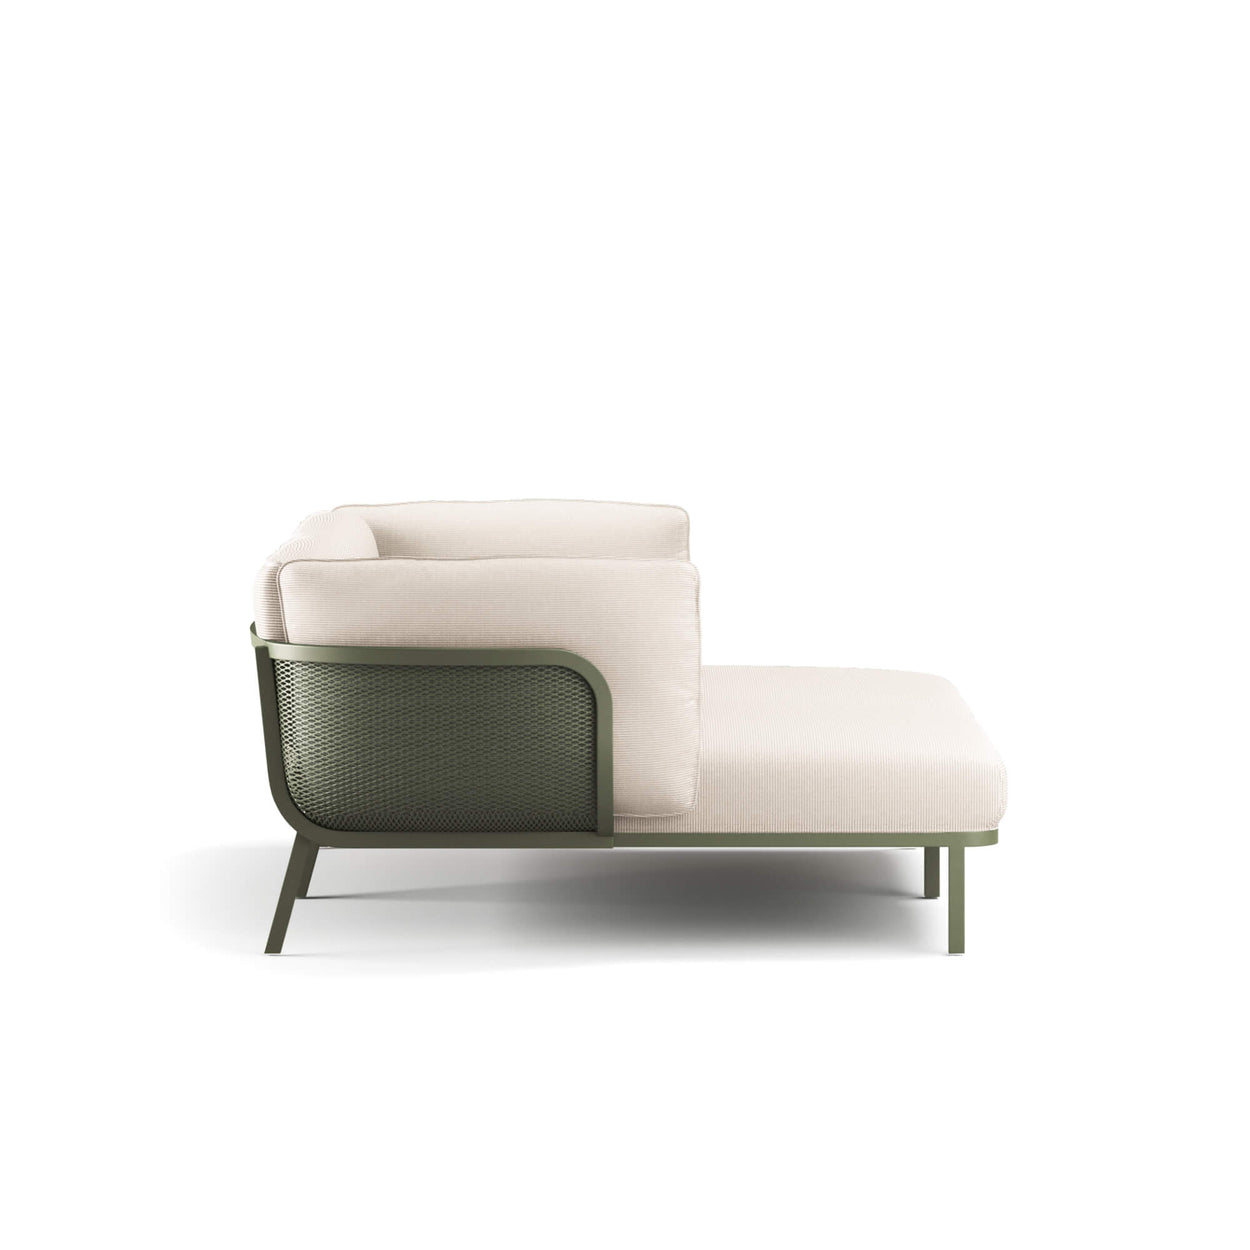 Cabla - Double daybed